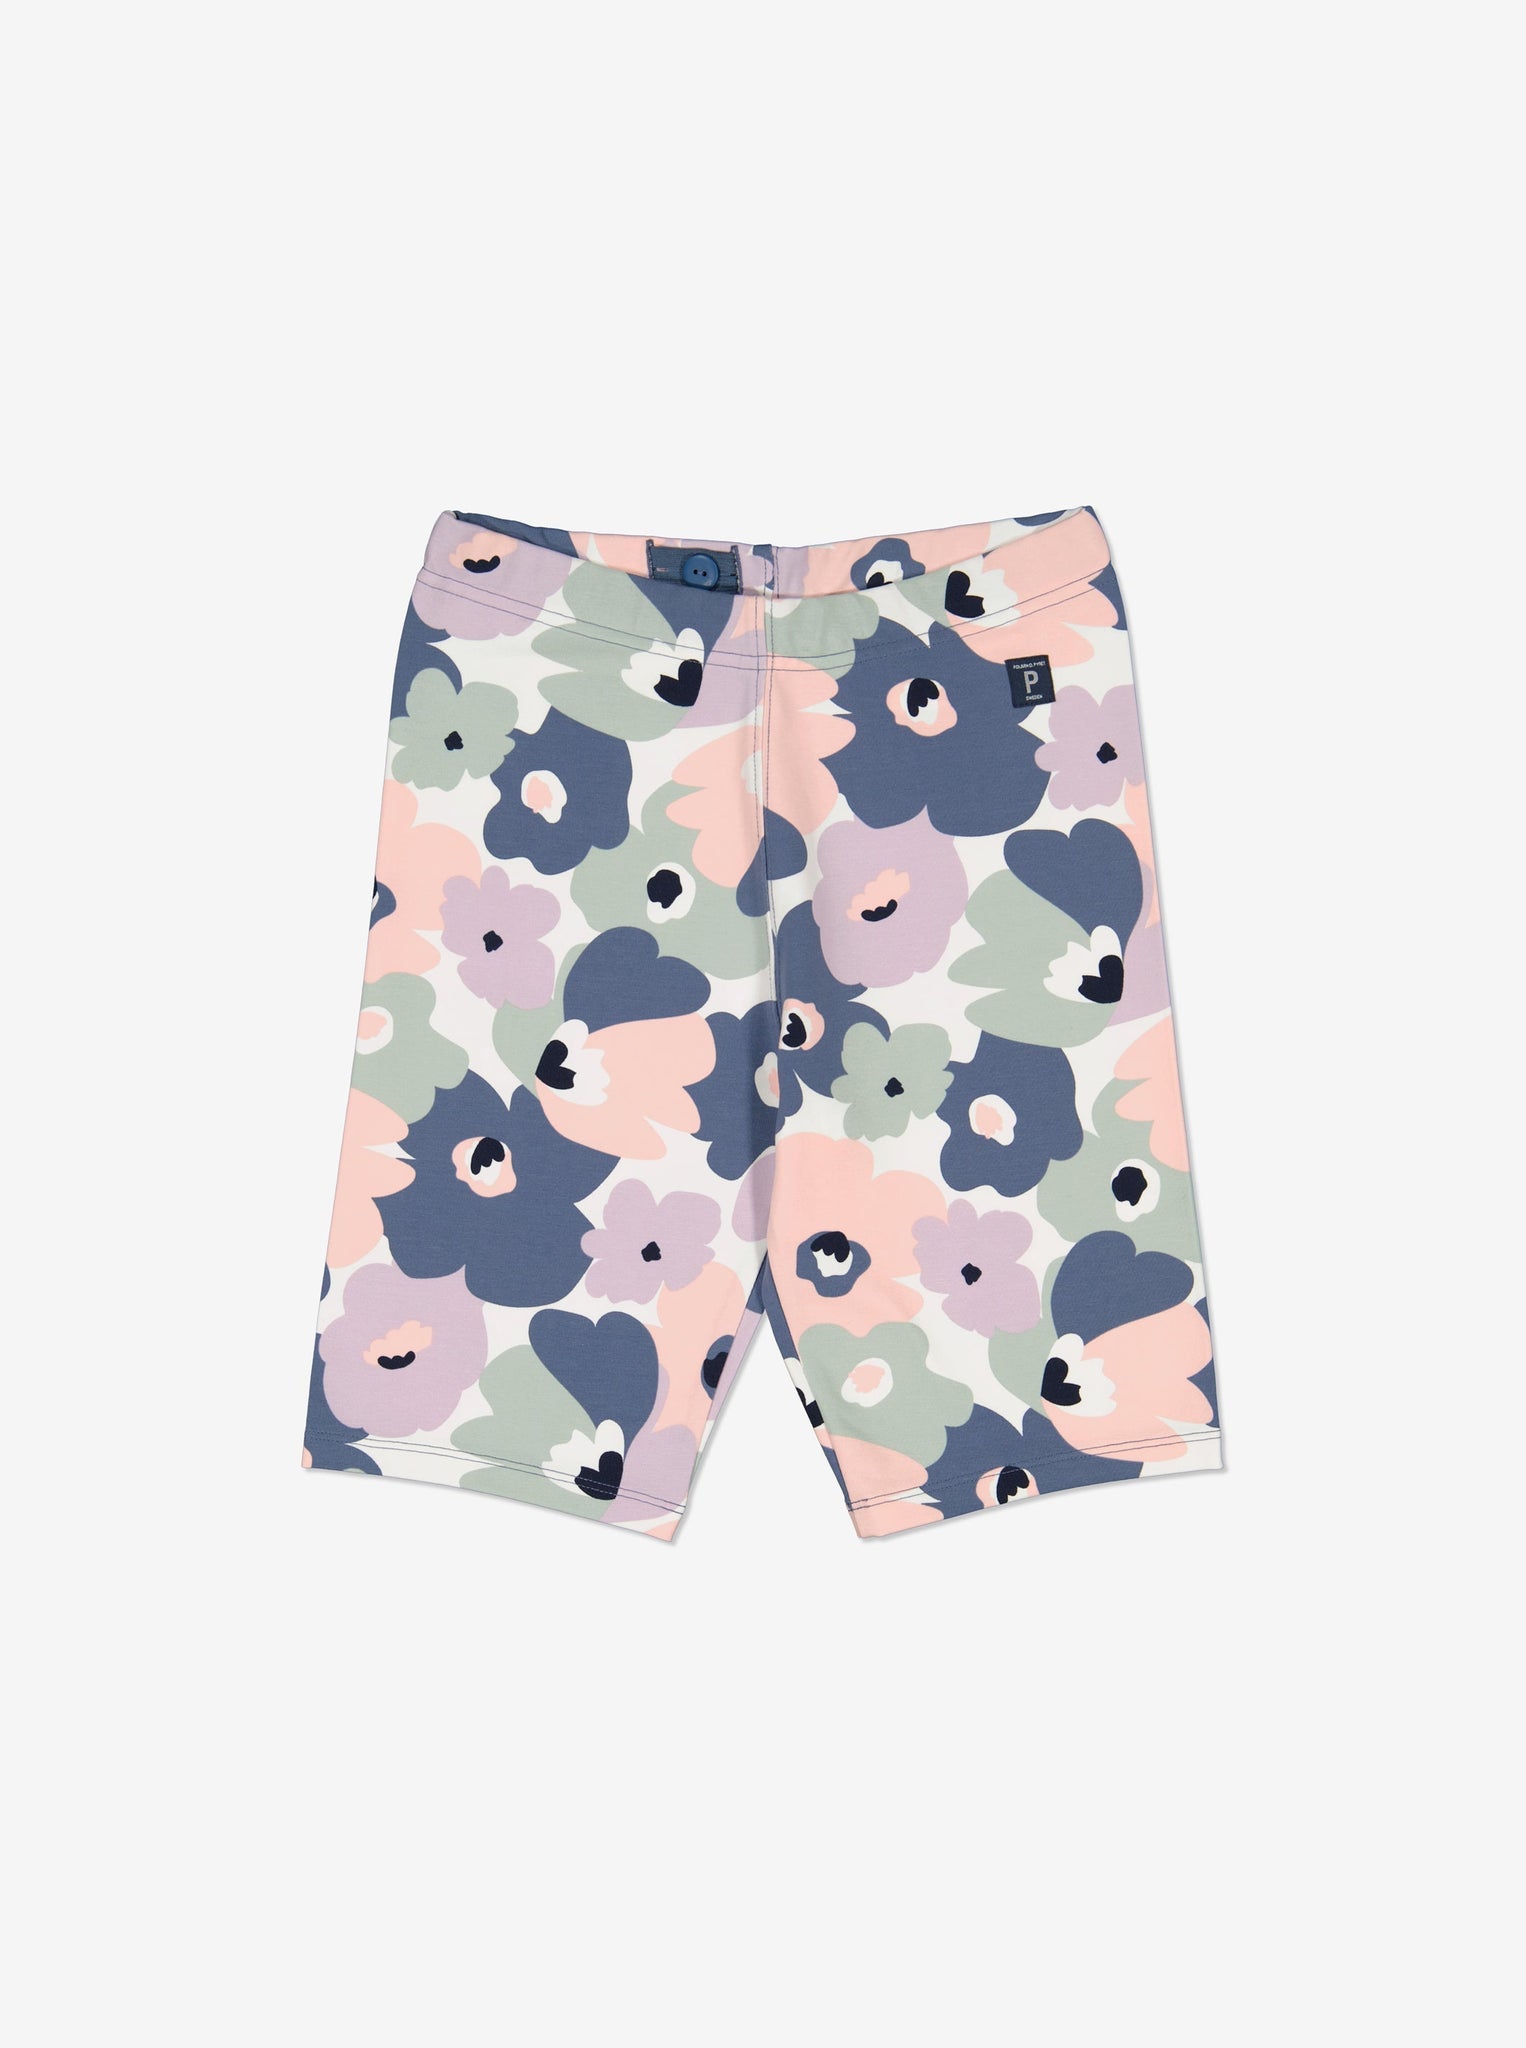  Floral Print Girls Shorts from Polarn O. Pyret Kidswear. Made using sustainable materials.